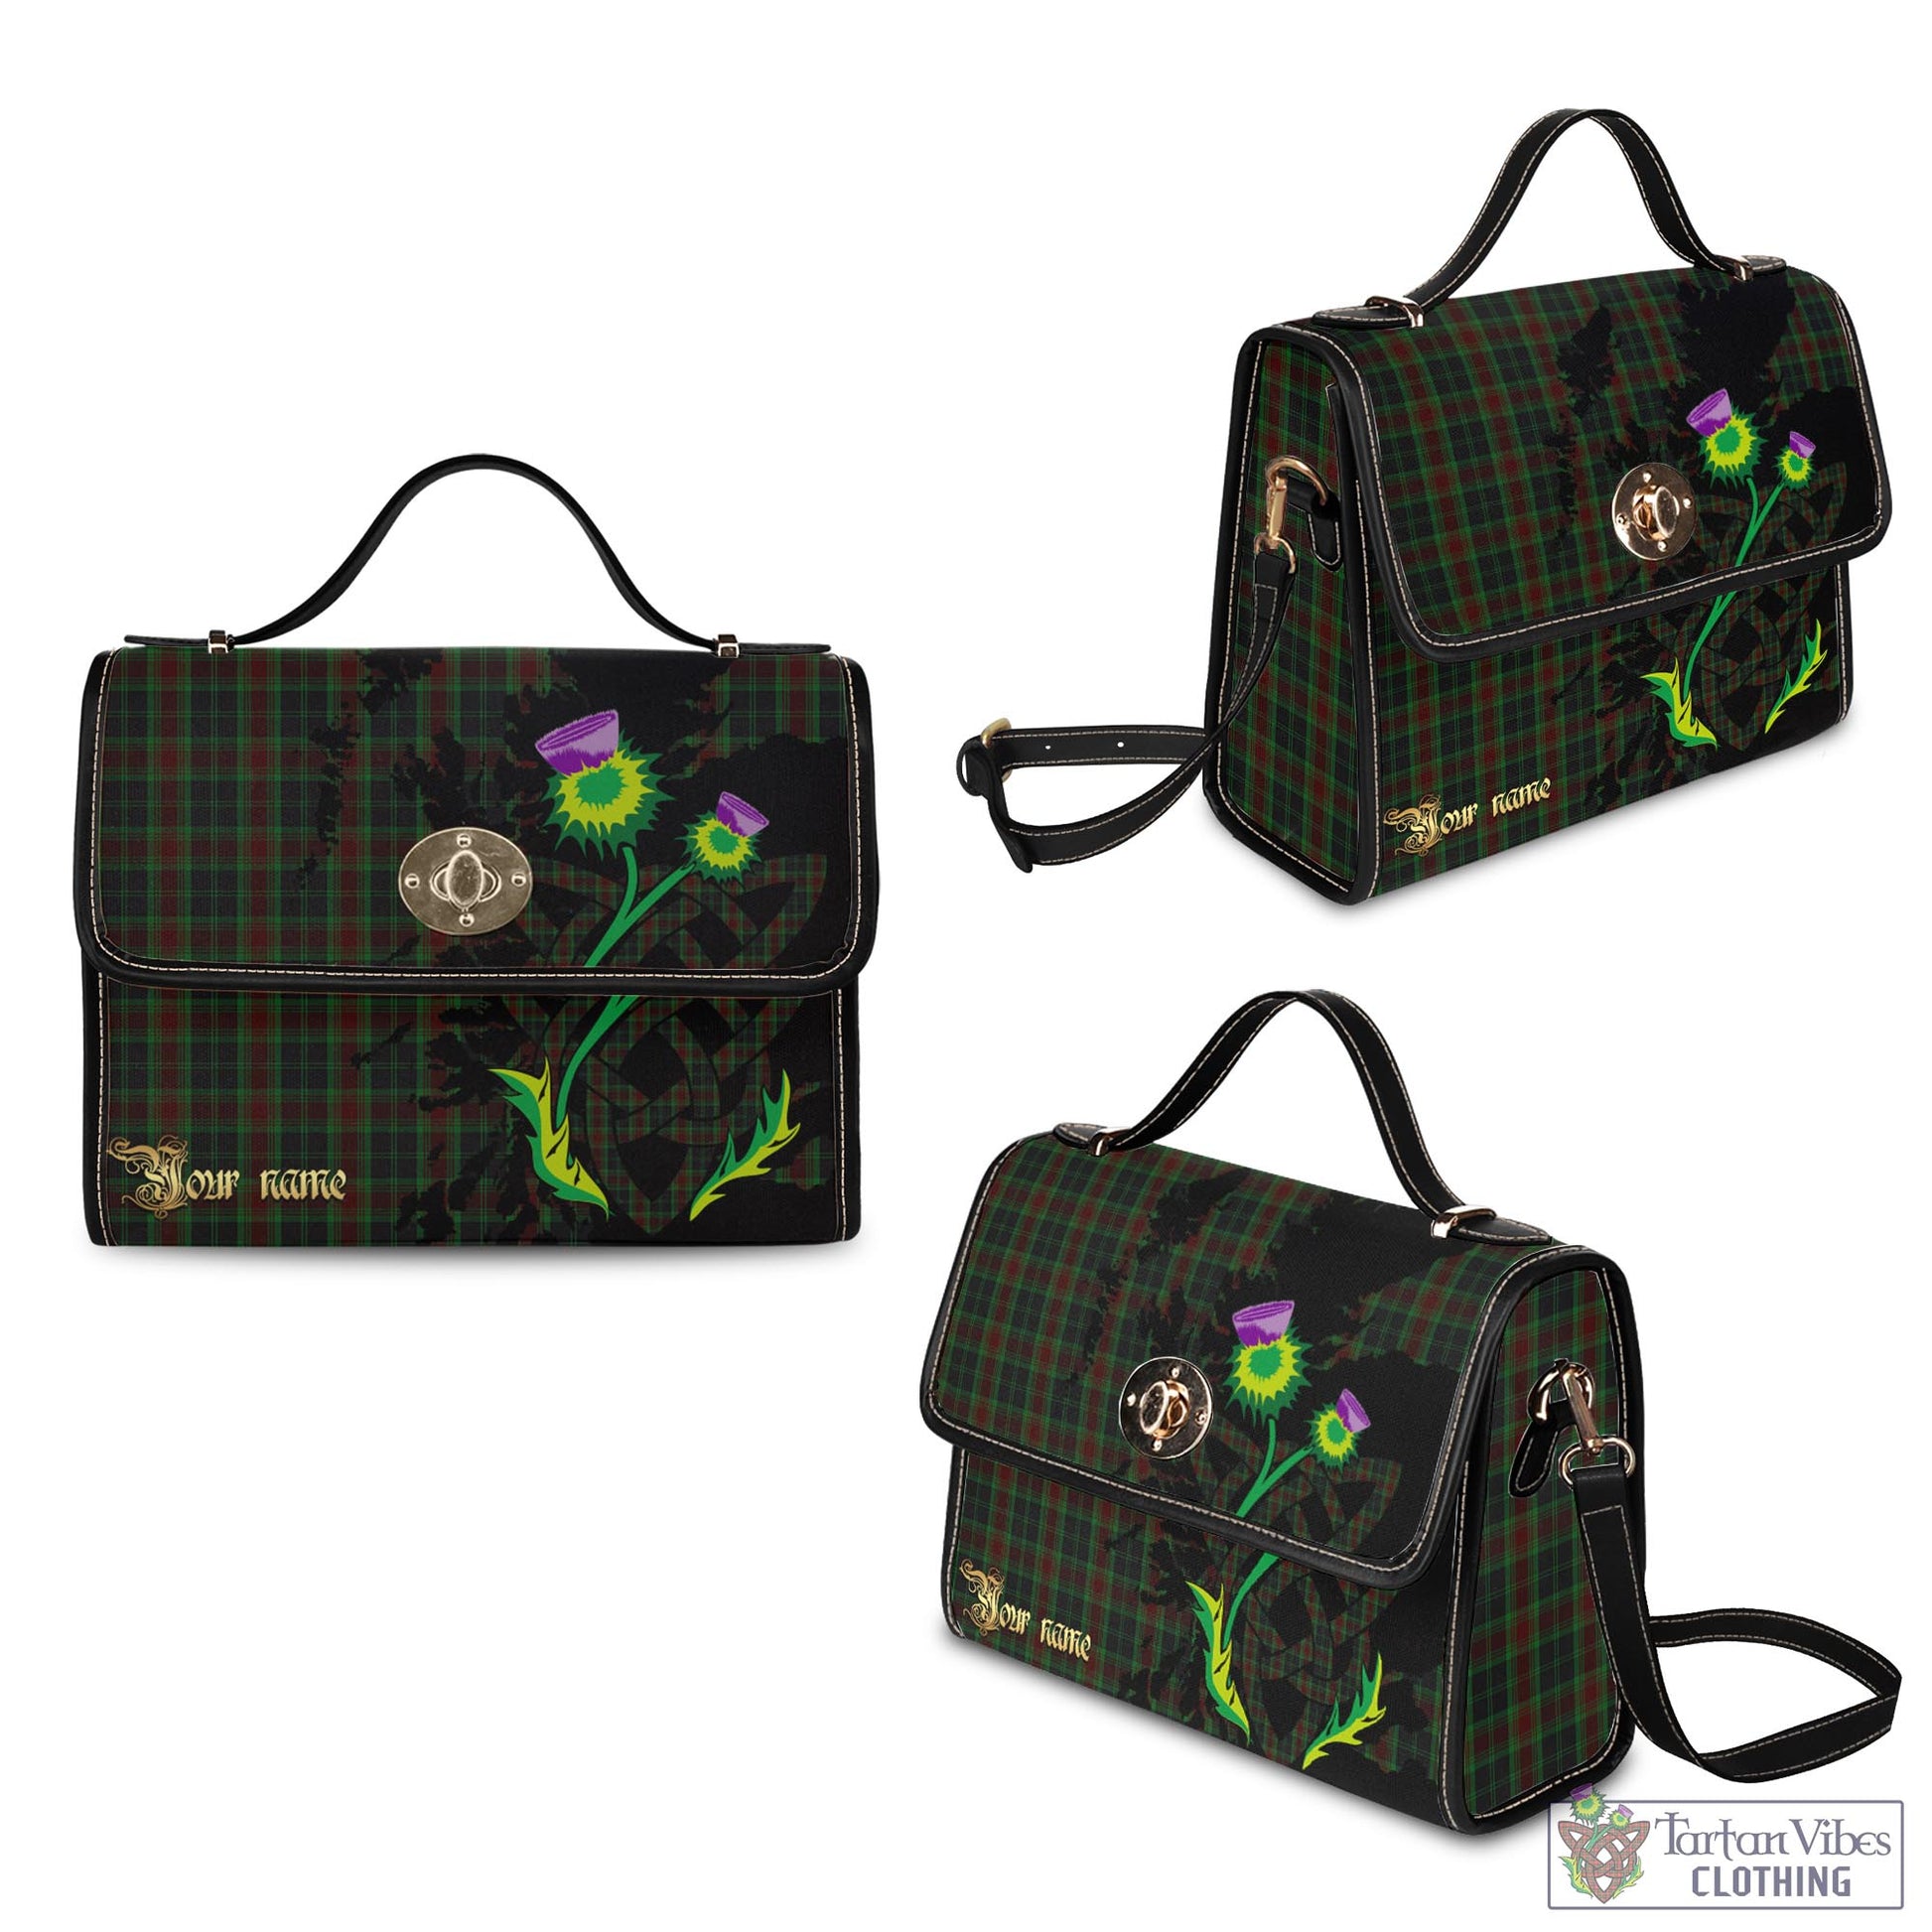 Tartan Vibes Clothing Carlow County Ireland Tartan Waterproof Canvas Bag with Scotland Map and Thistle Celtic Accents